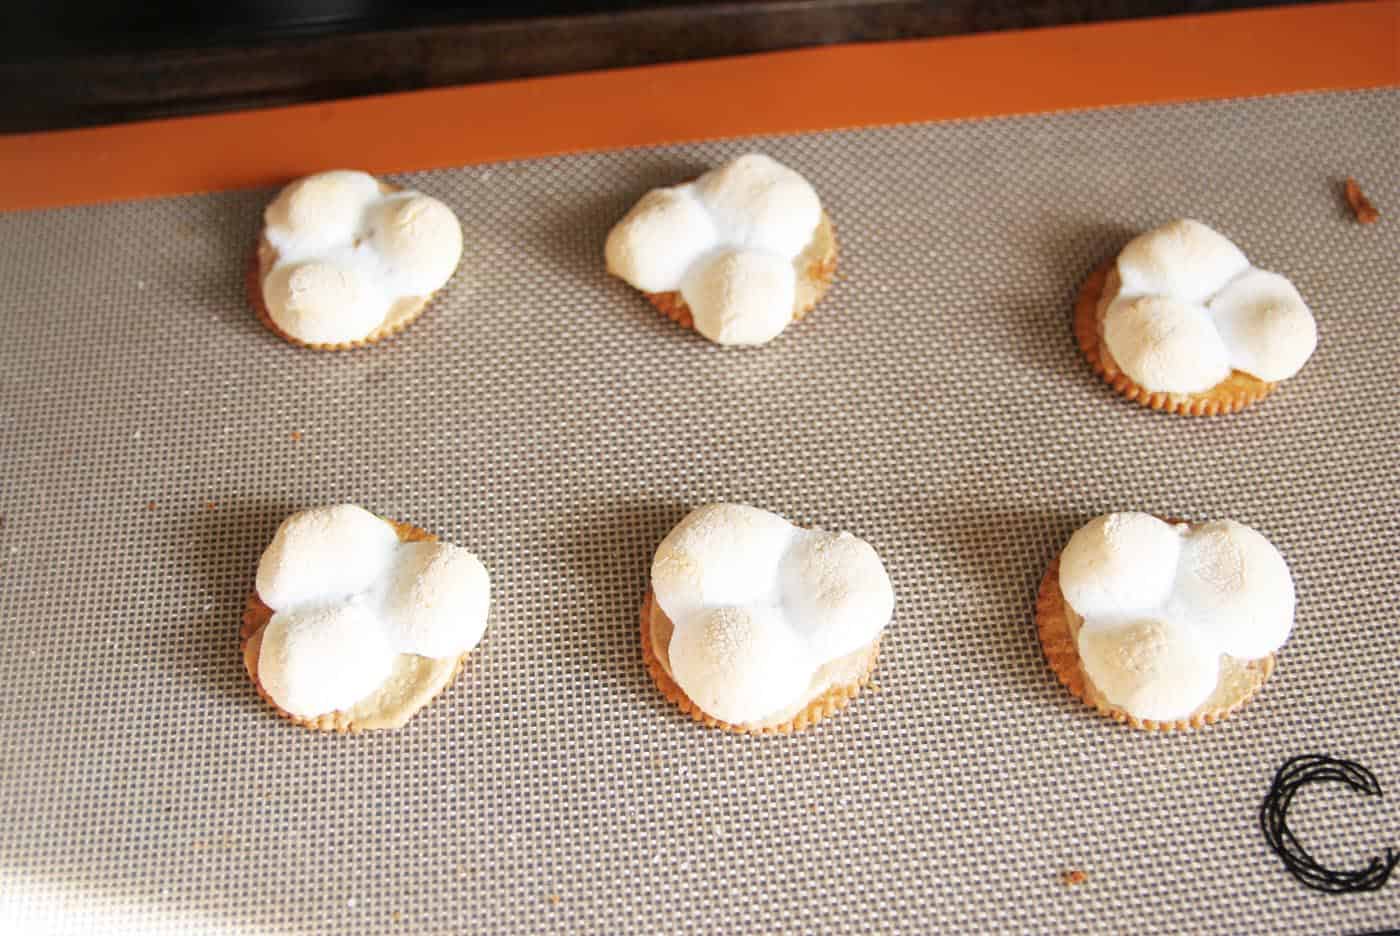 Marshmallows on top of crackers in the oven